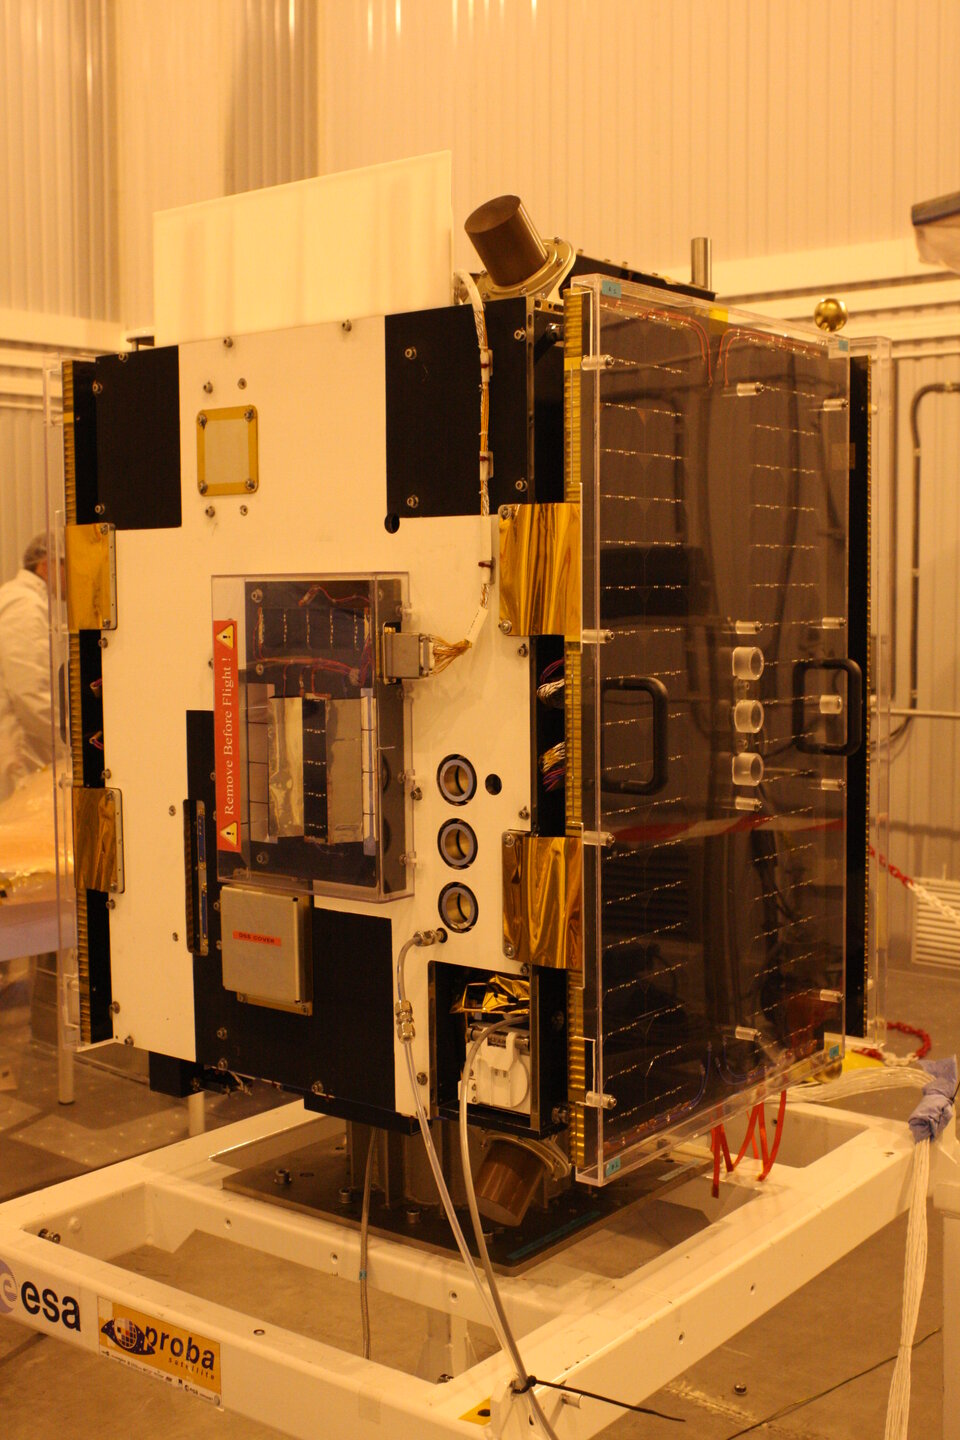 Proba-2 ready for Joint Operations with Rockot Launcher authorities